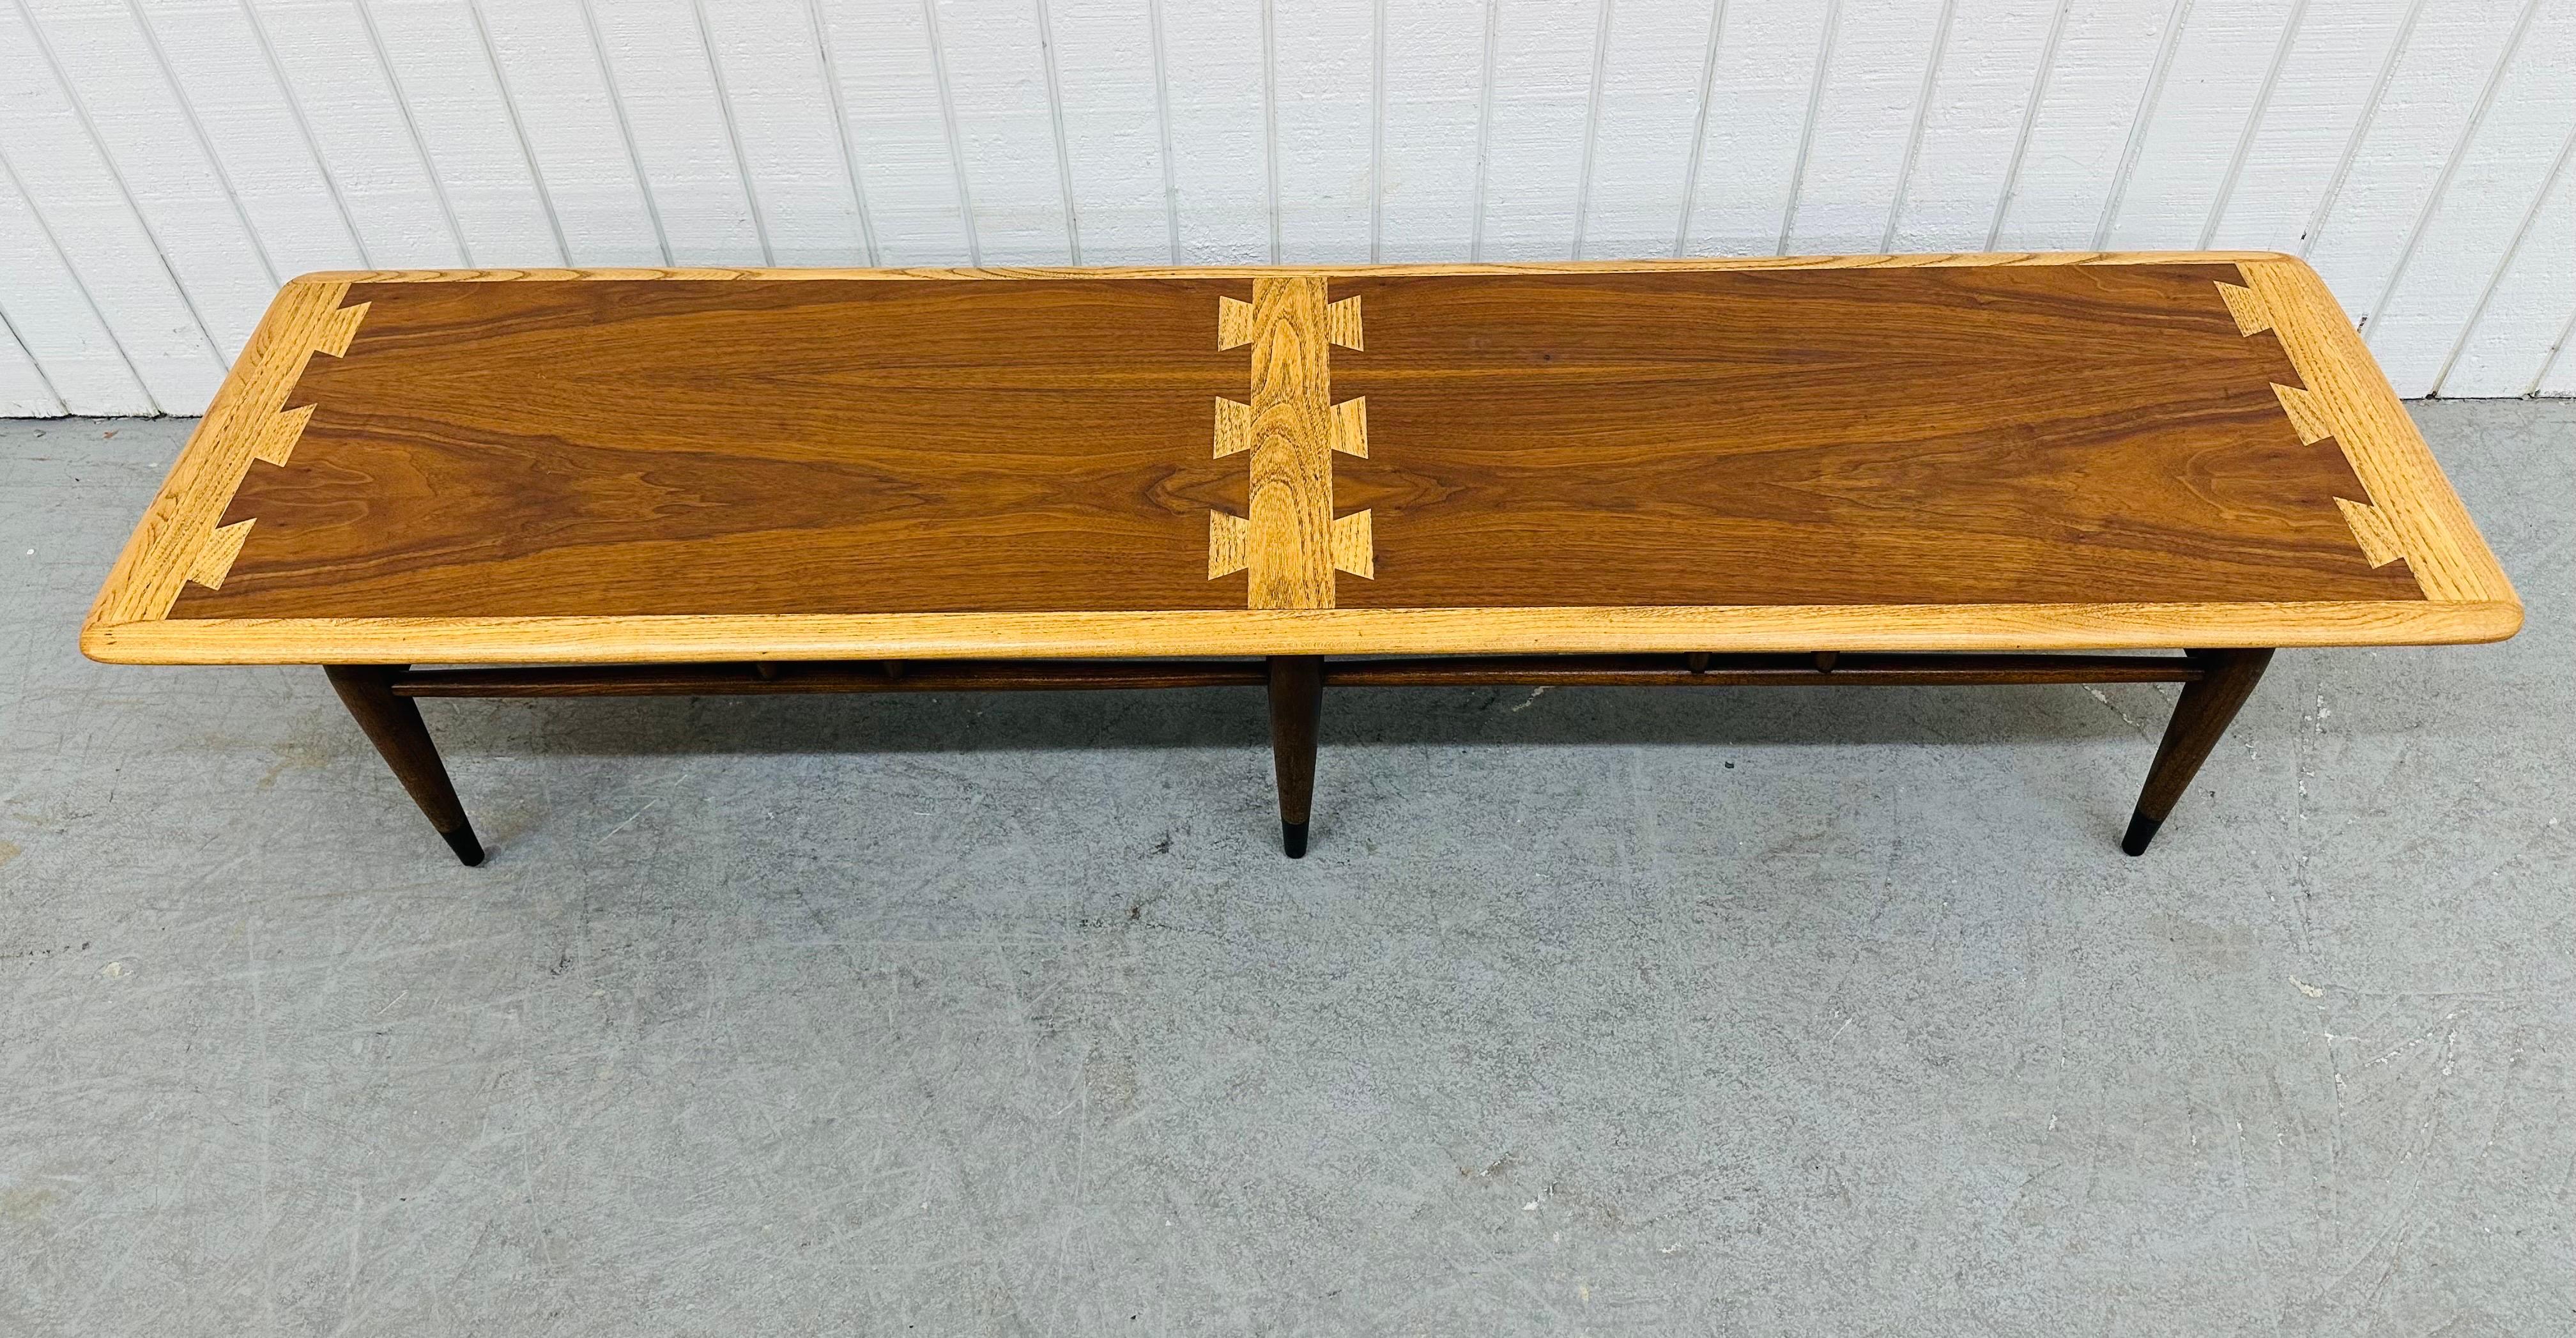 This listing is for a Mid-Century Modern Lane Acclaim Walnut Coffee Table. Featuring a straight line rectangular design, iconic dovetailed top, six legs with stretchers, and a beautiful walnut finish. This is an exceptional combination of quality